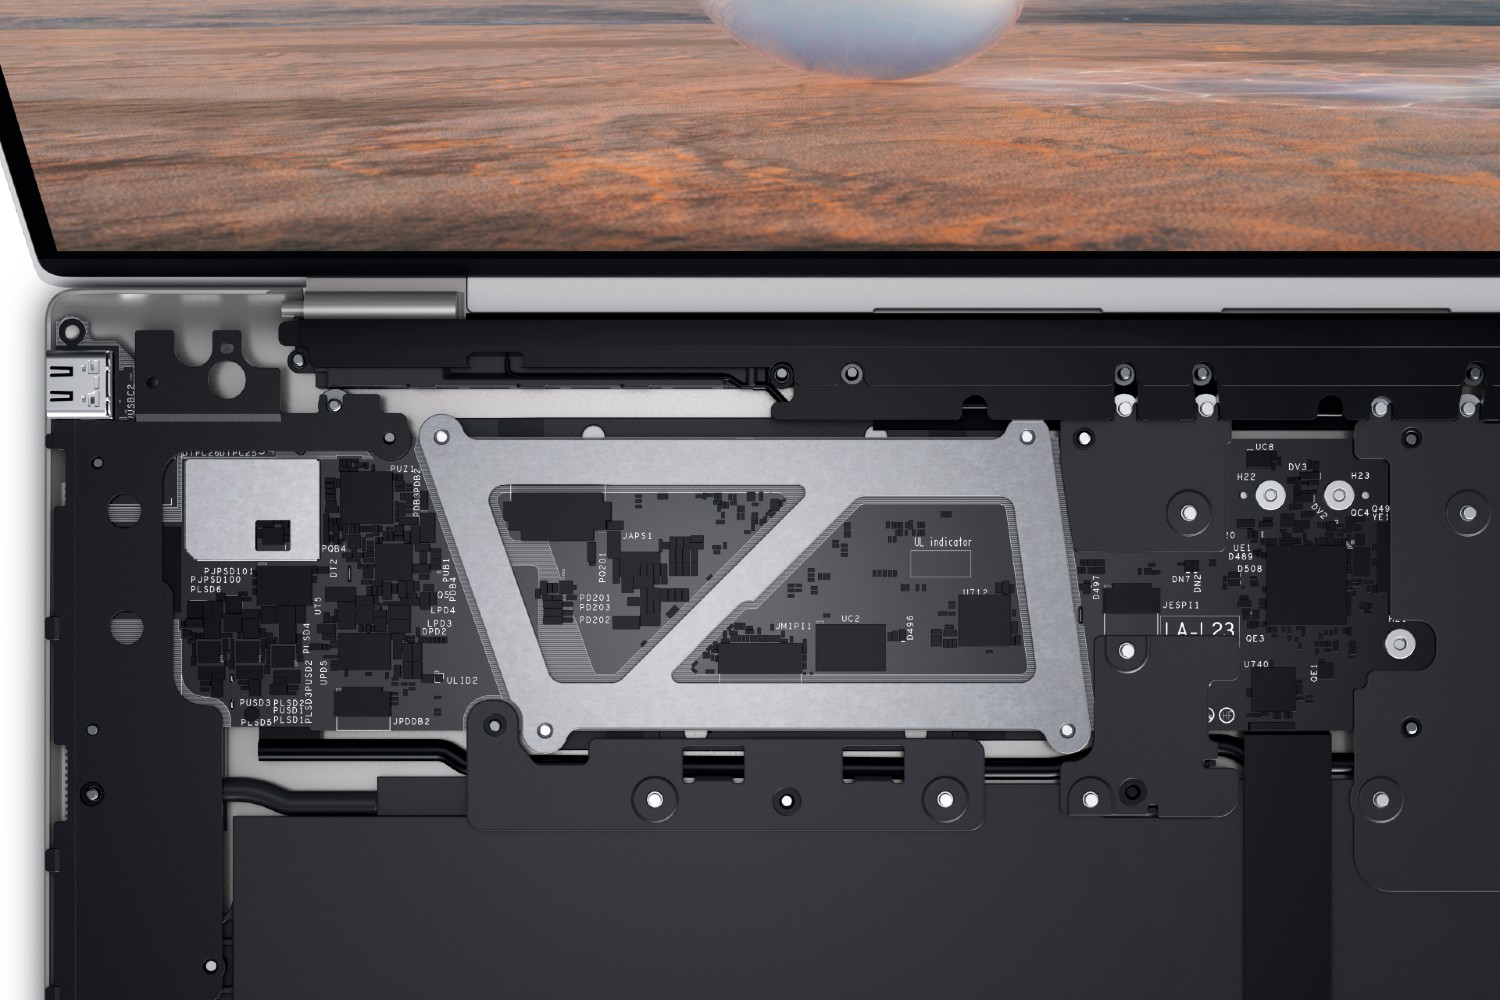 The internals of the new XPS 13.